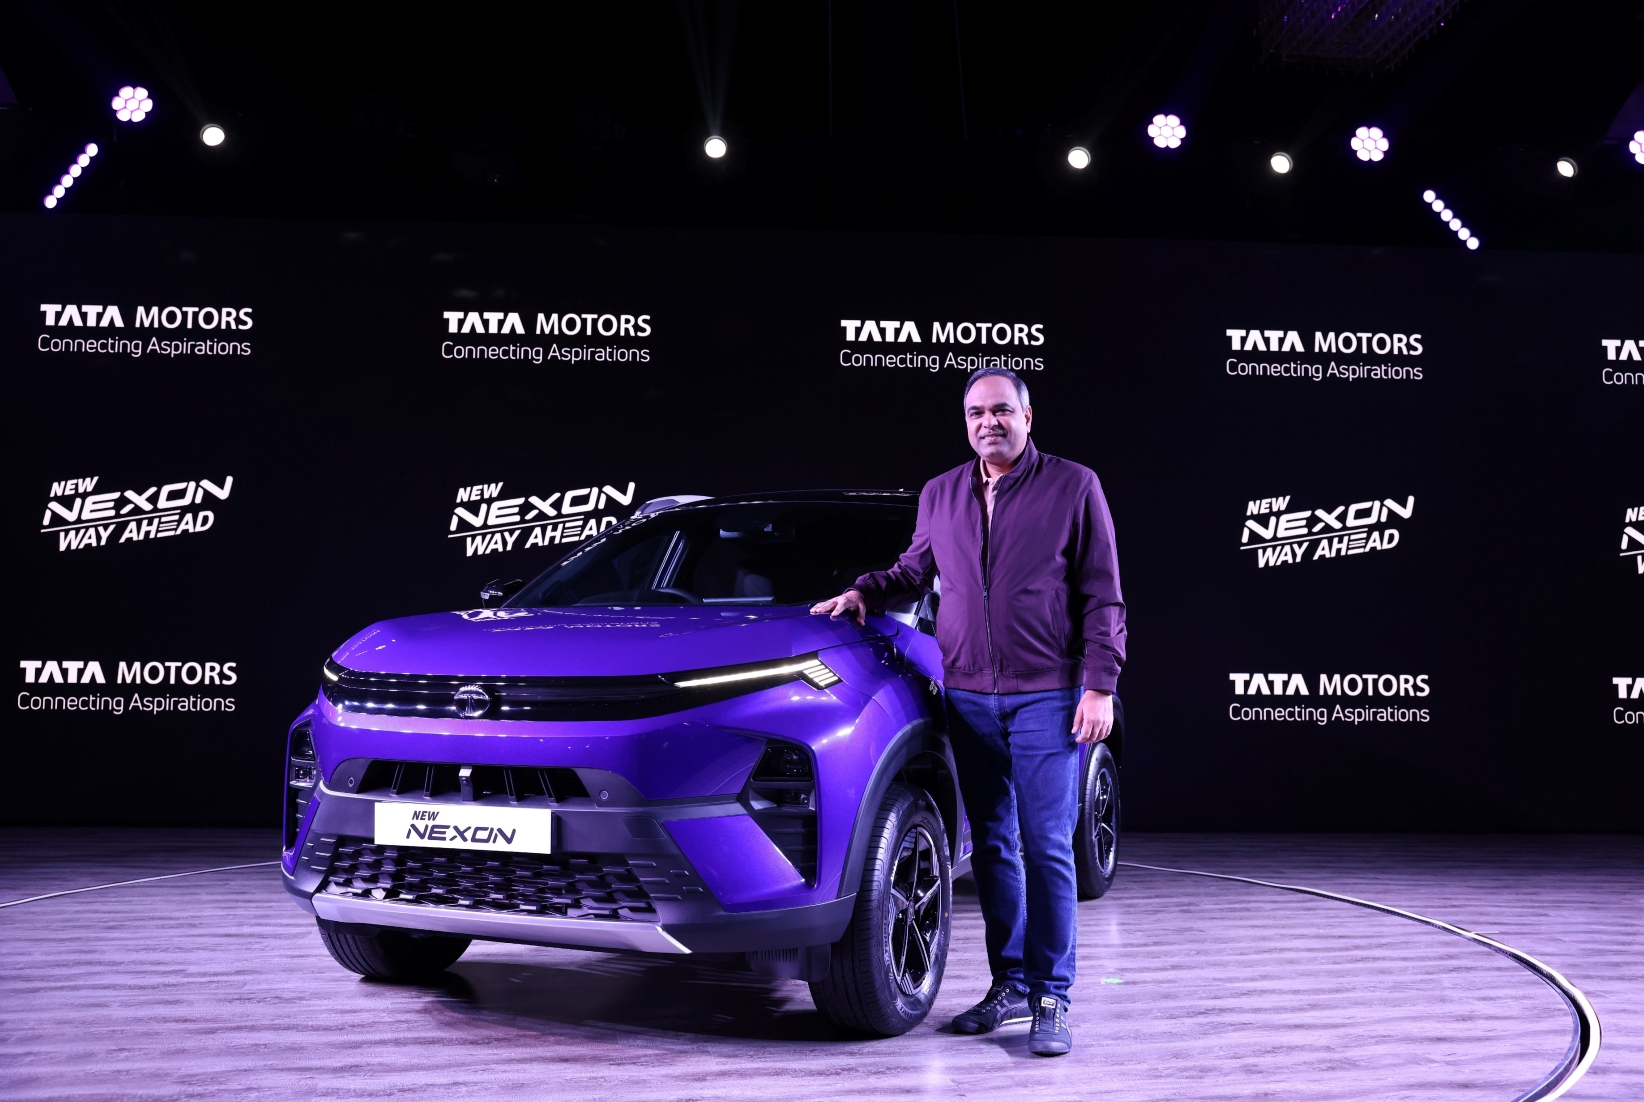 Rs.8.09 Lakh - New Nexon Launched